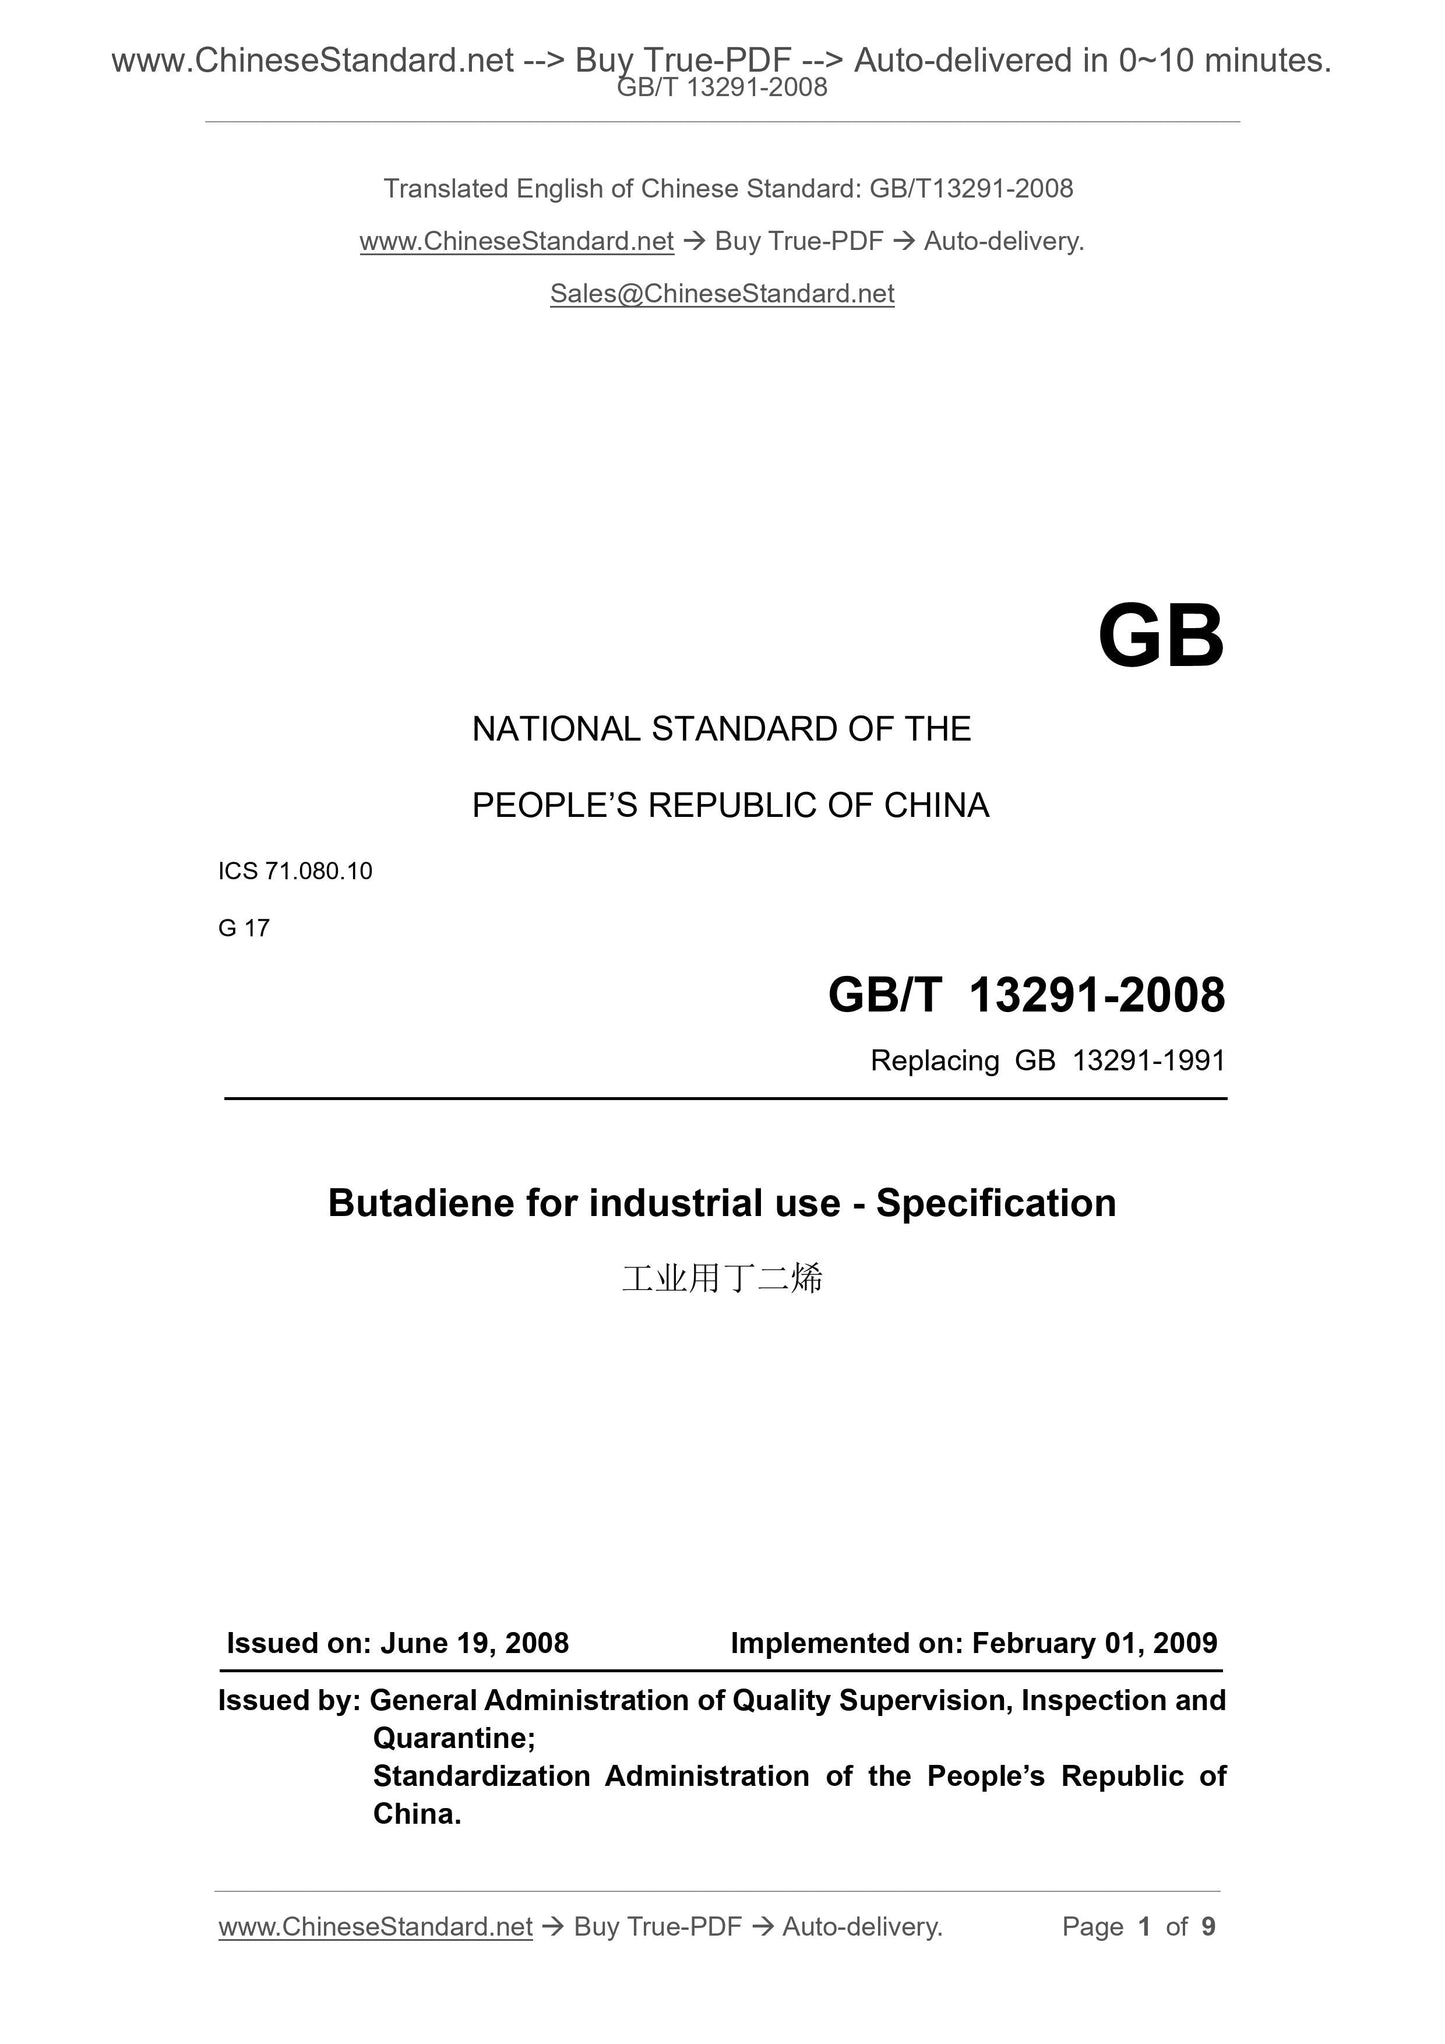 GB/T 13291-2008 Page 1